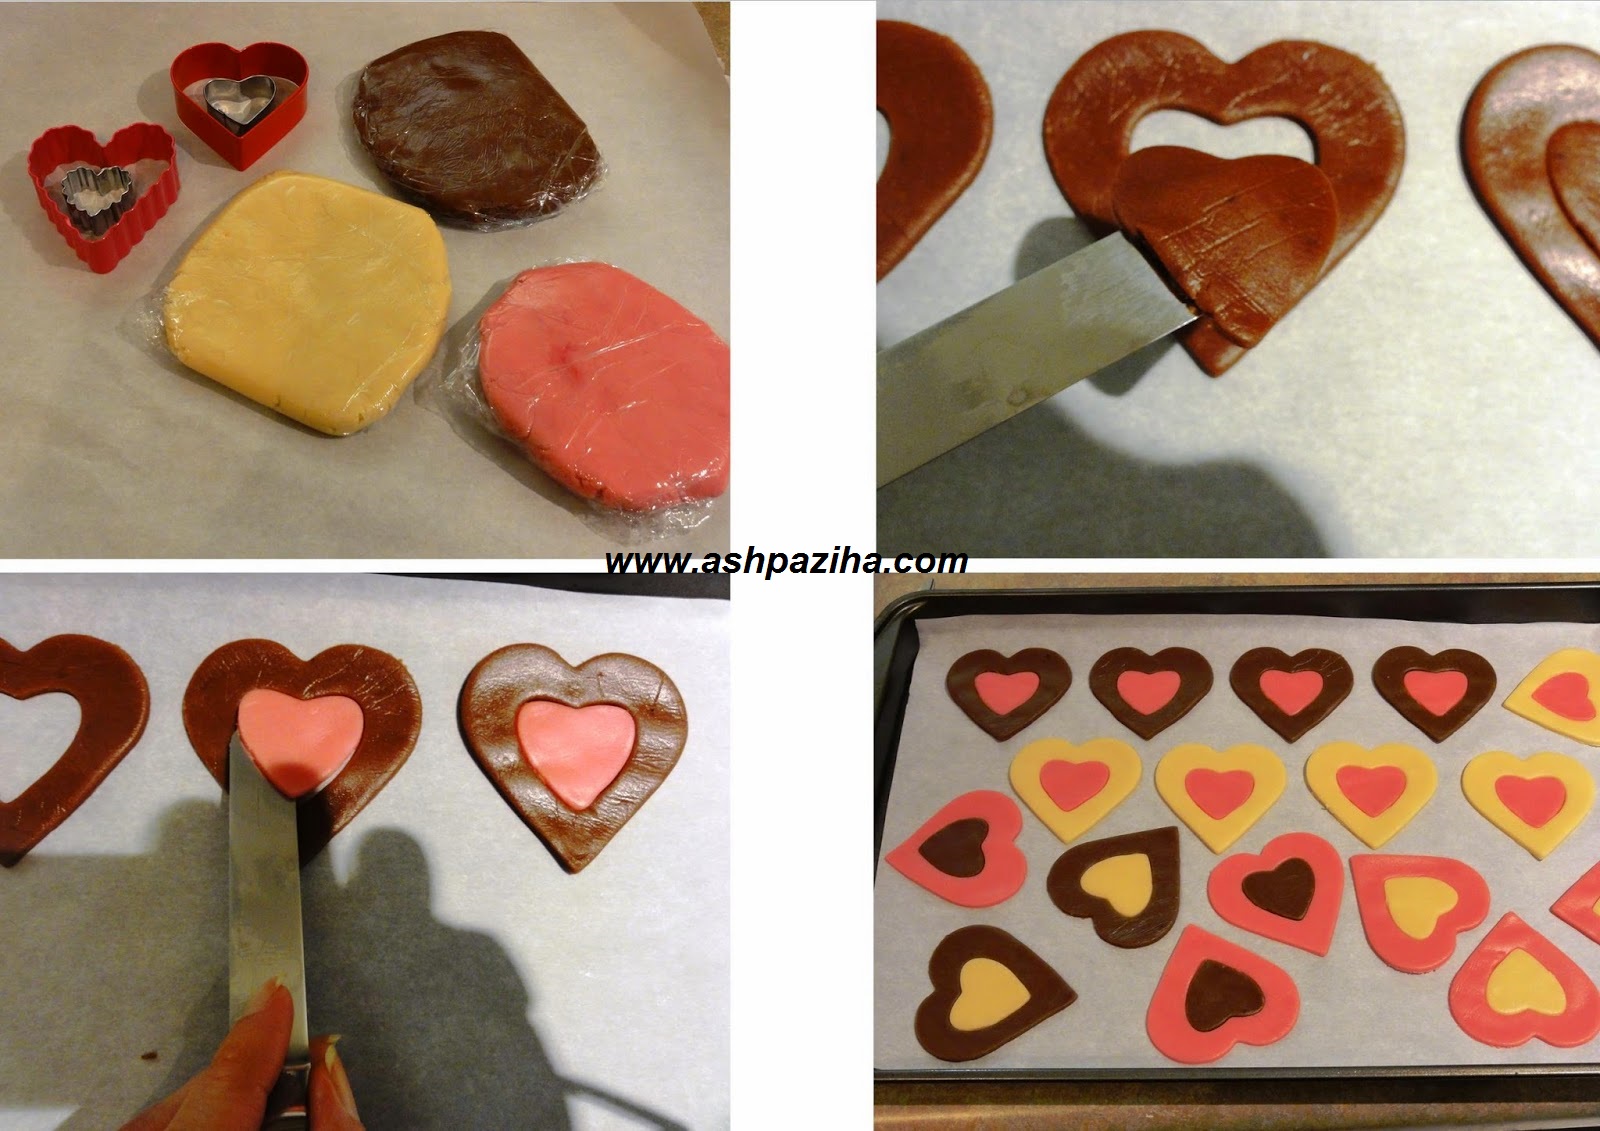 Mode - supplying - Biscuits - Heart (4)